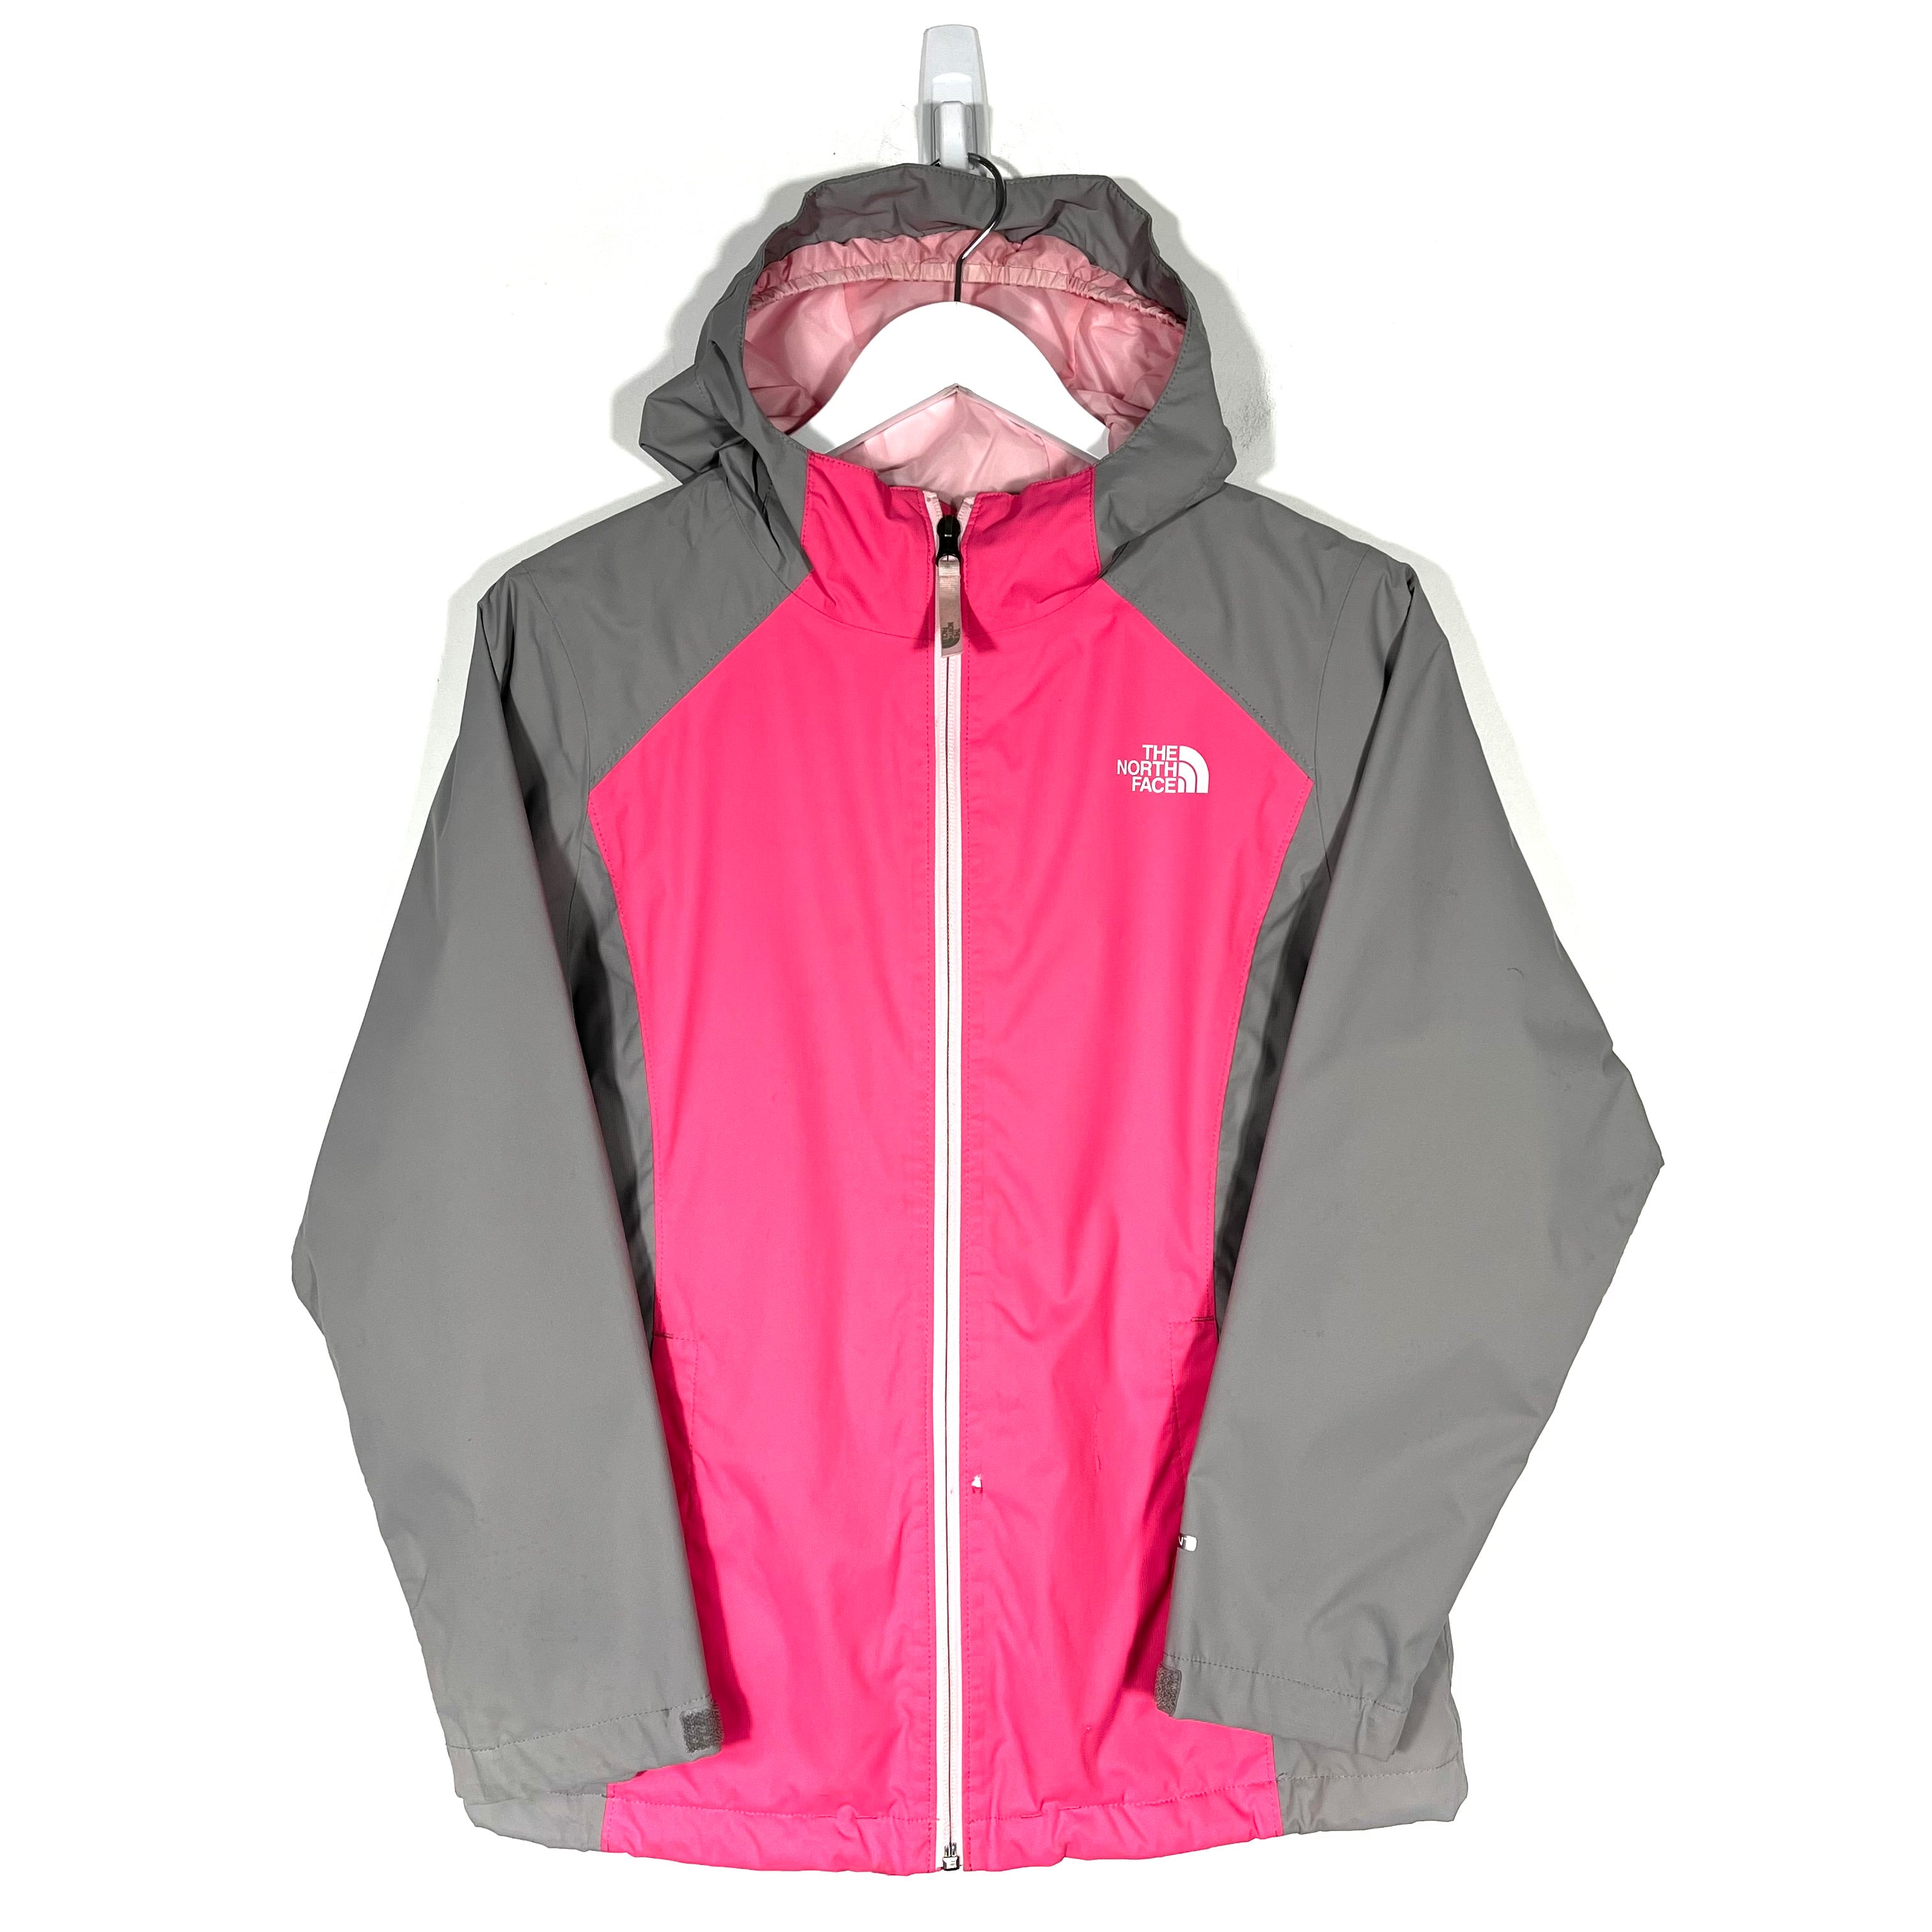 The North Face Lightweight Jacket - Women's Small